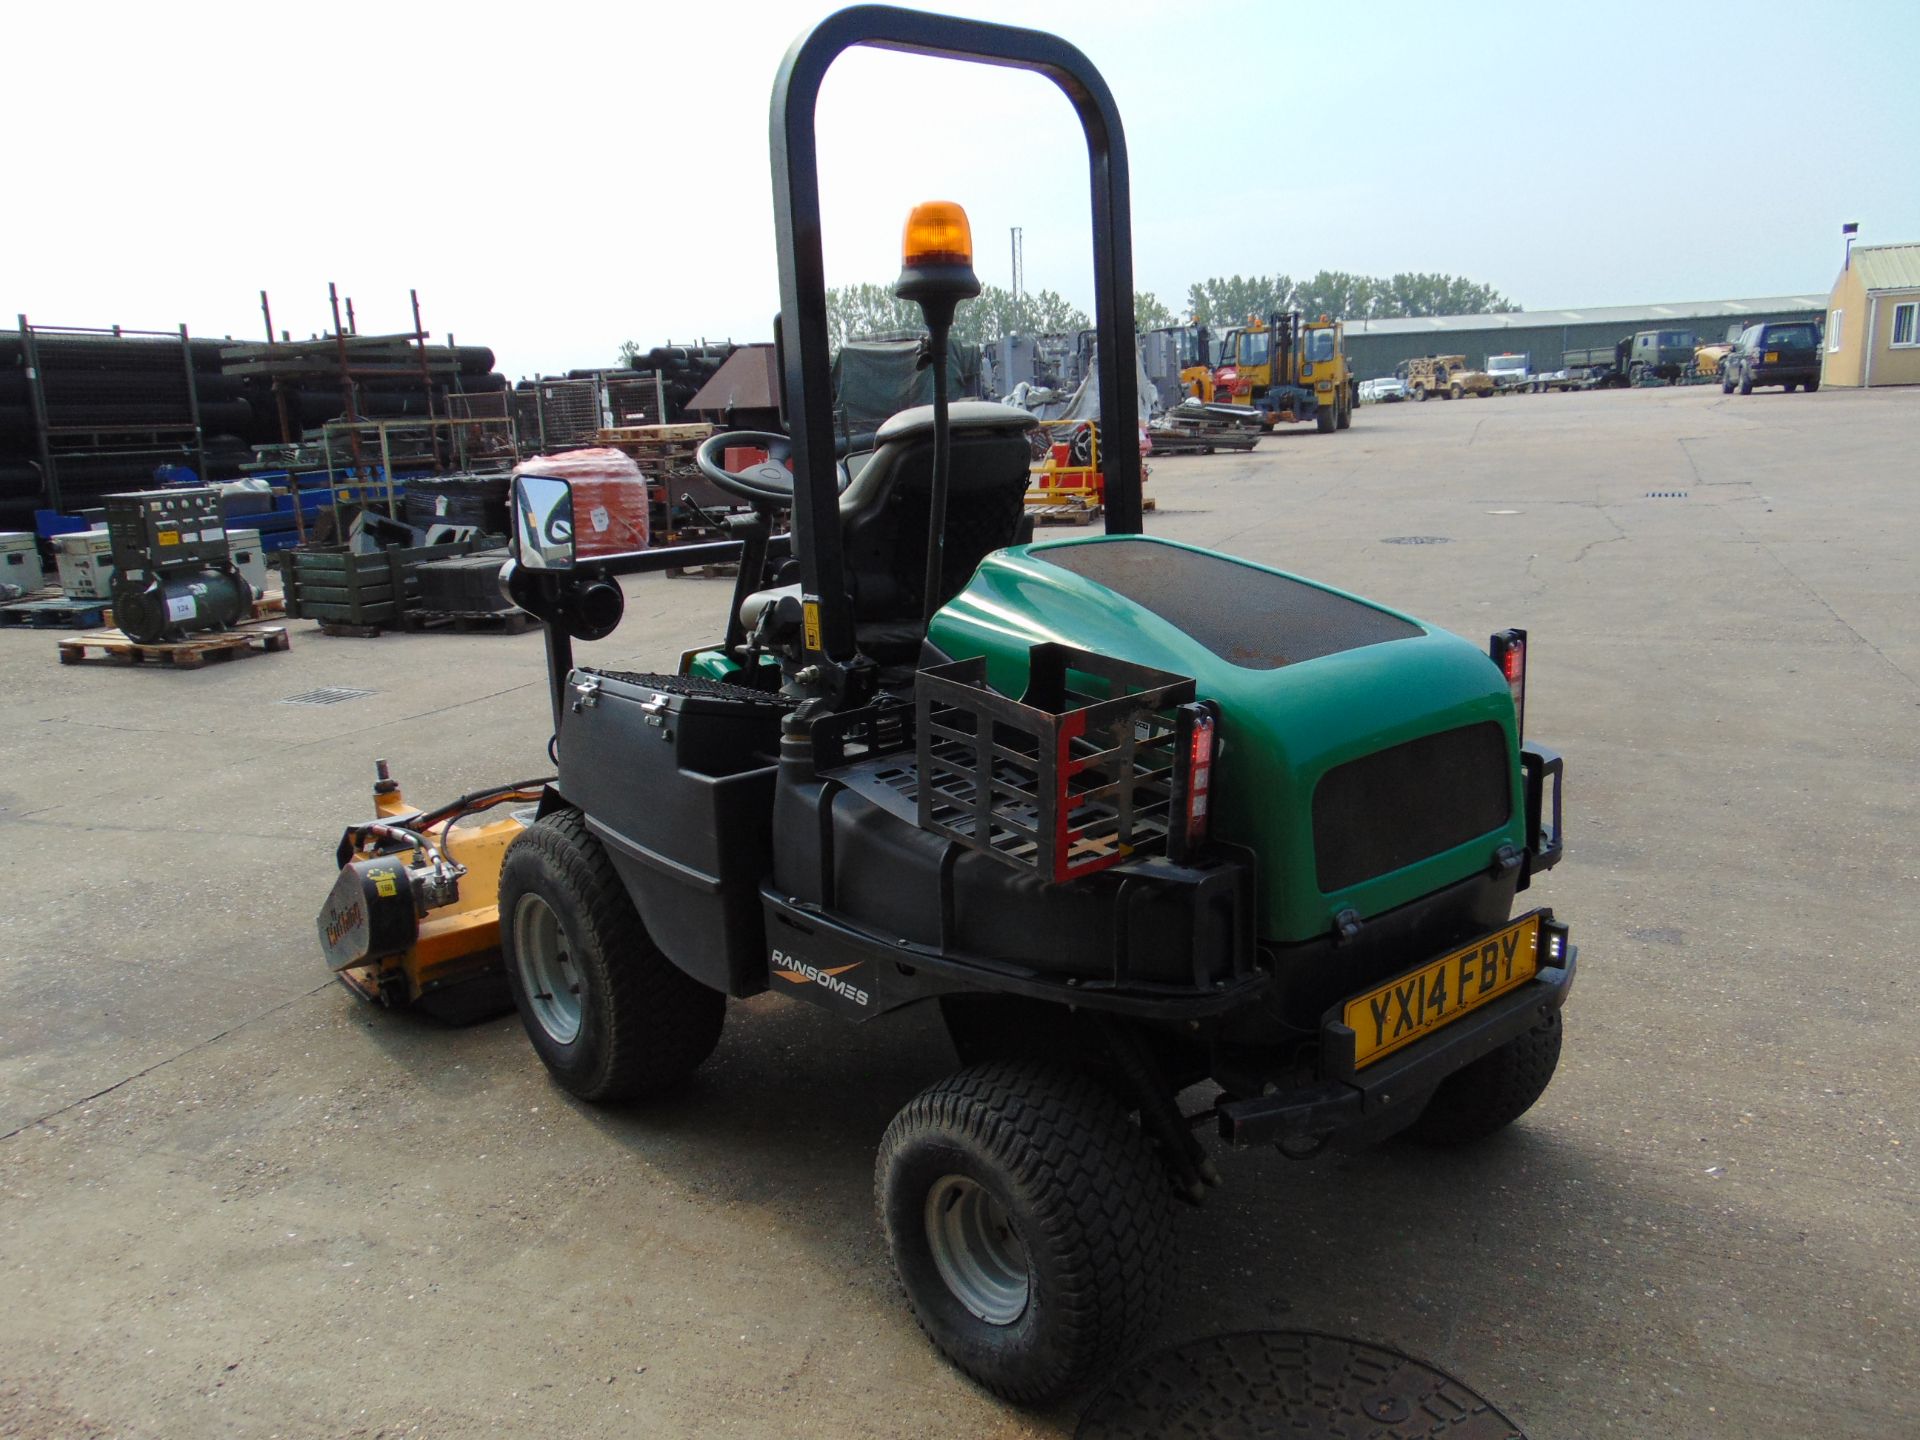 2014 Ransomes HR300 C/W Muthing Outfront Flail Mower ONLY 3,489 Hours! - Image 7 of 22